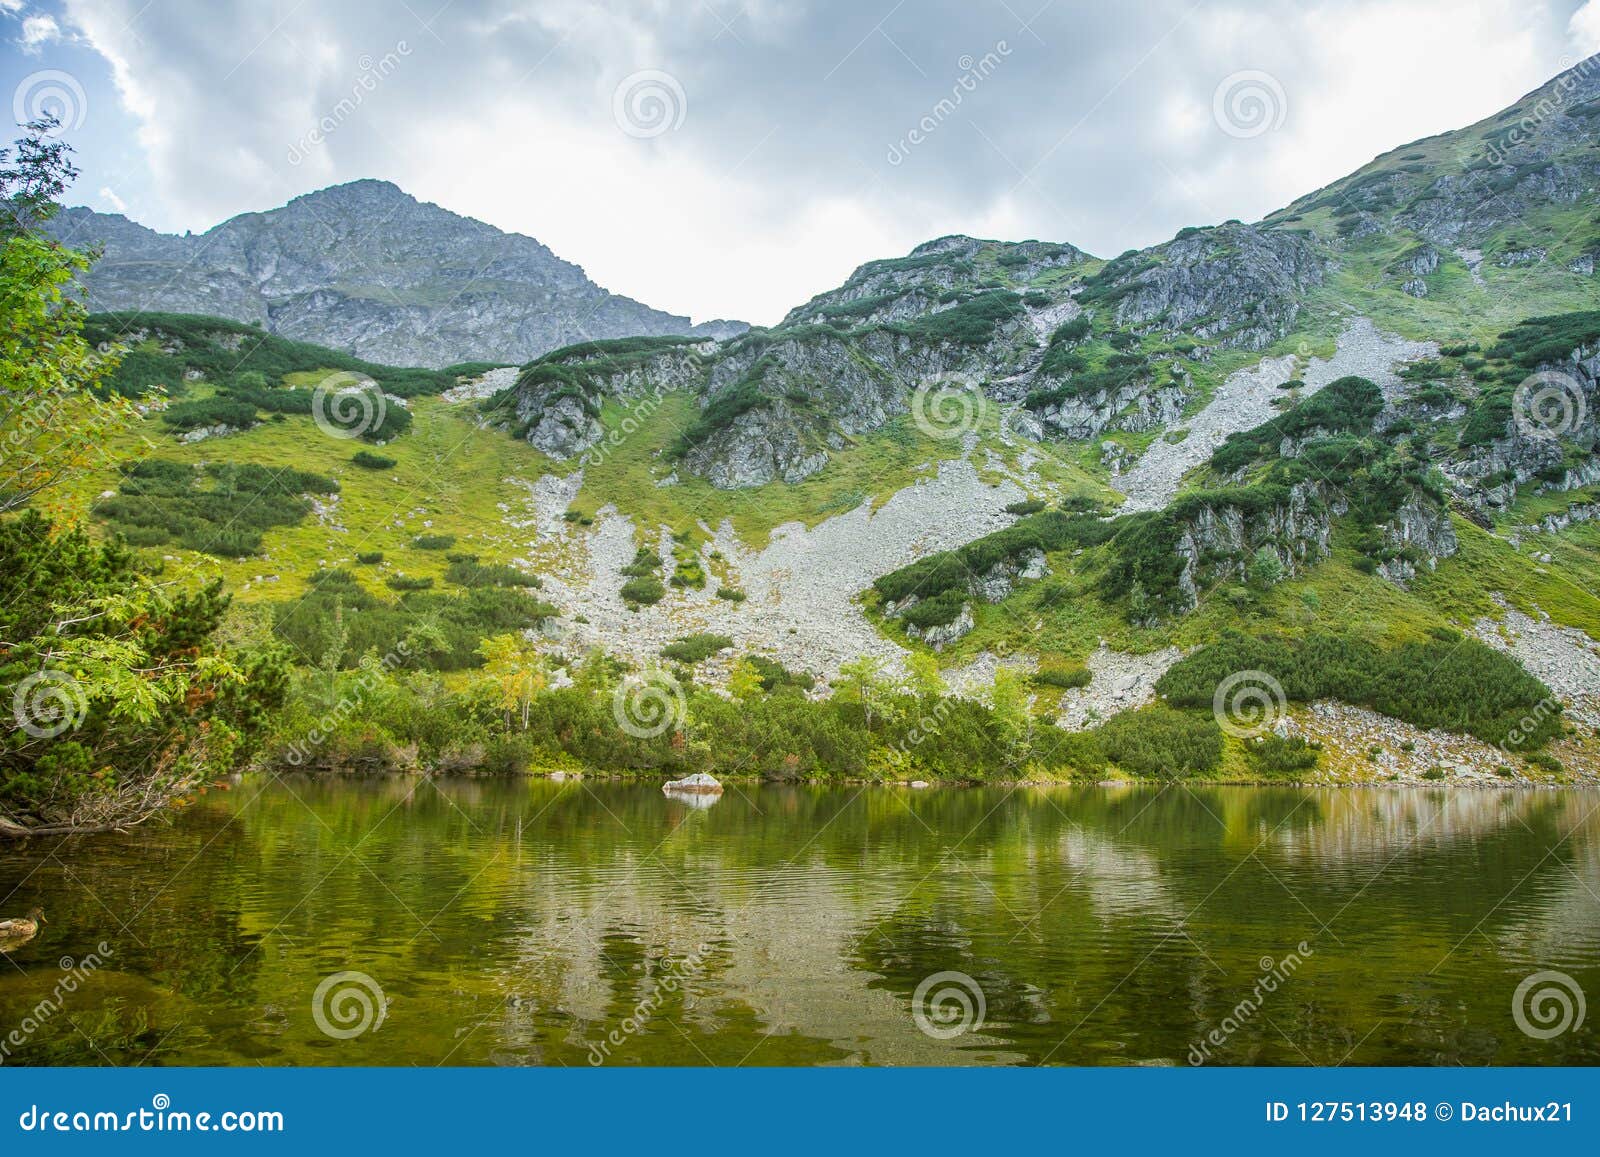 A Beautiful, Clean Lake In The Mountain Valley In Calm ...